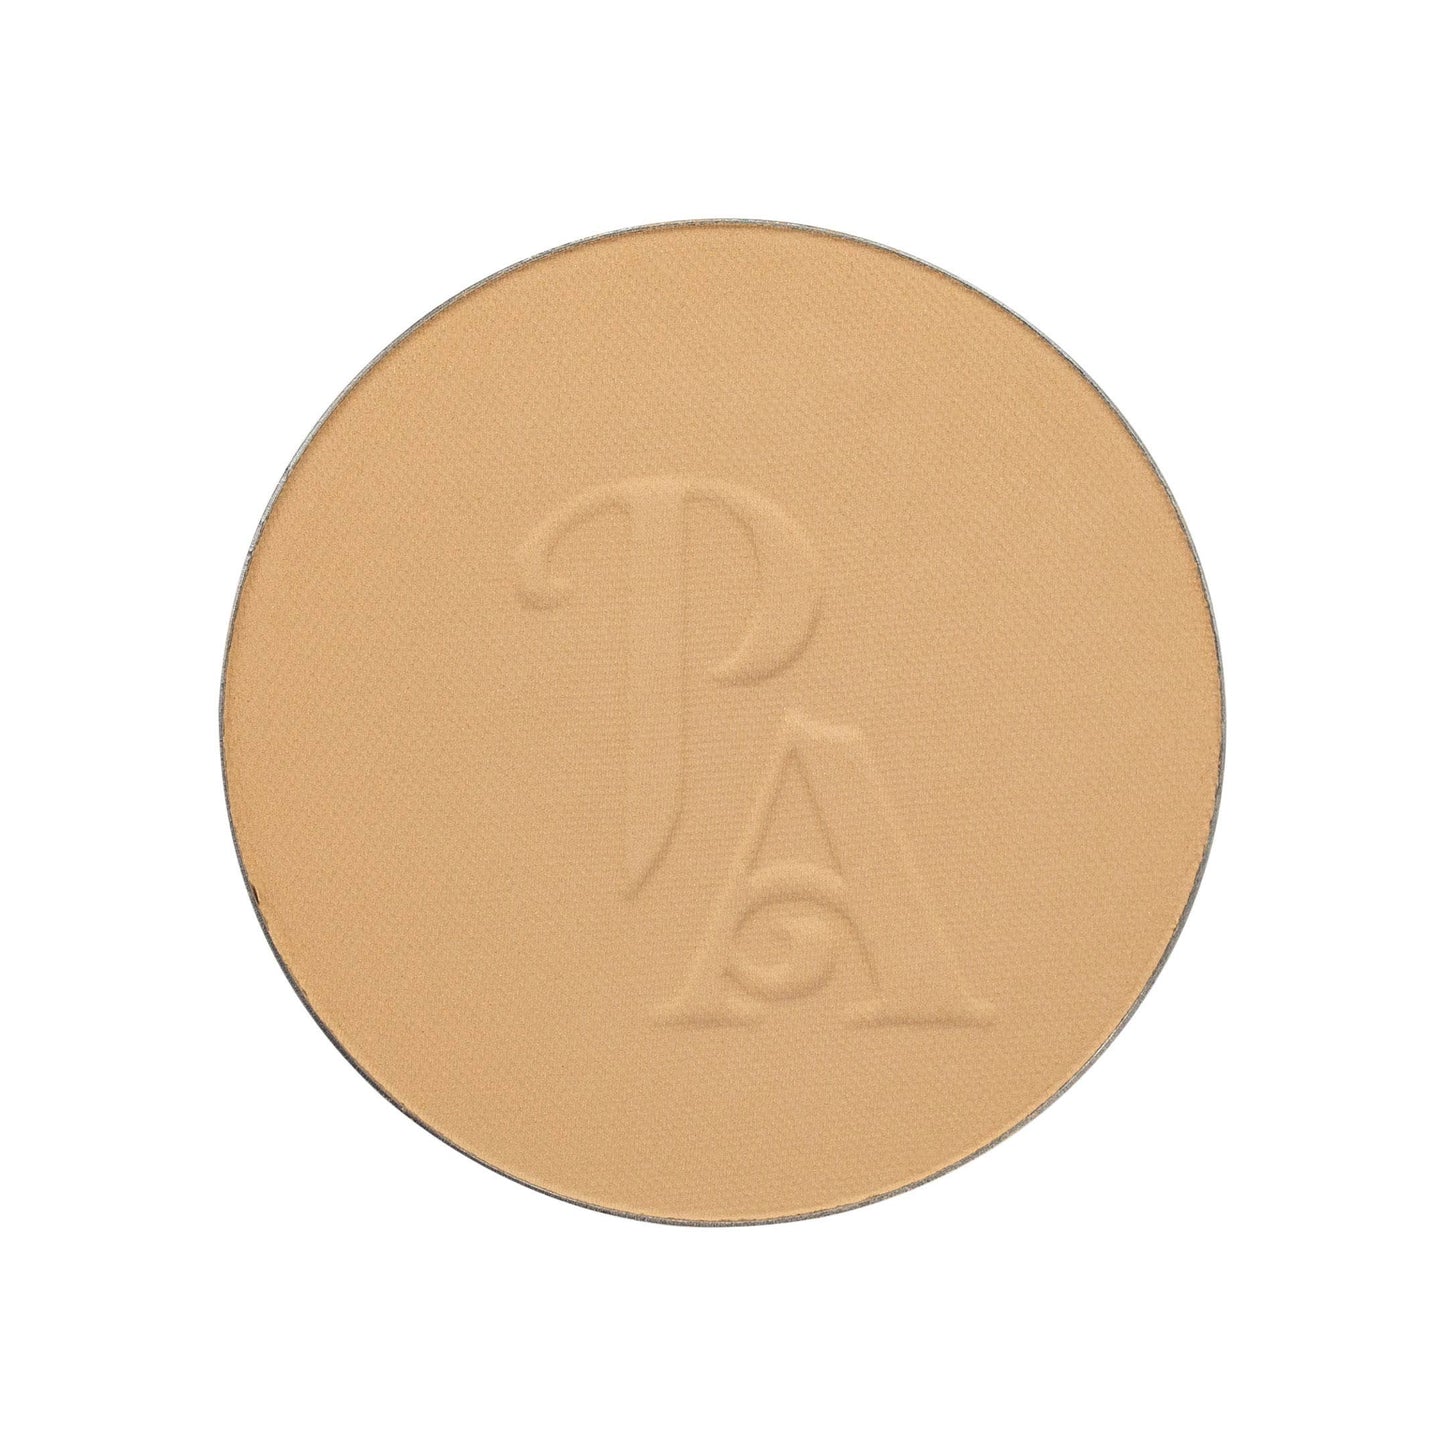 Very Fair Pressed Foundation (Compact)